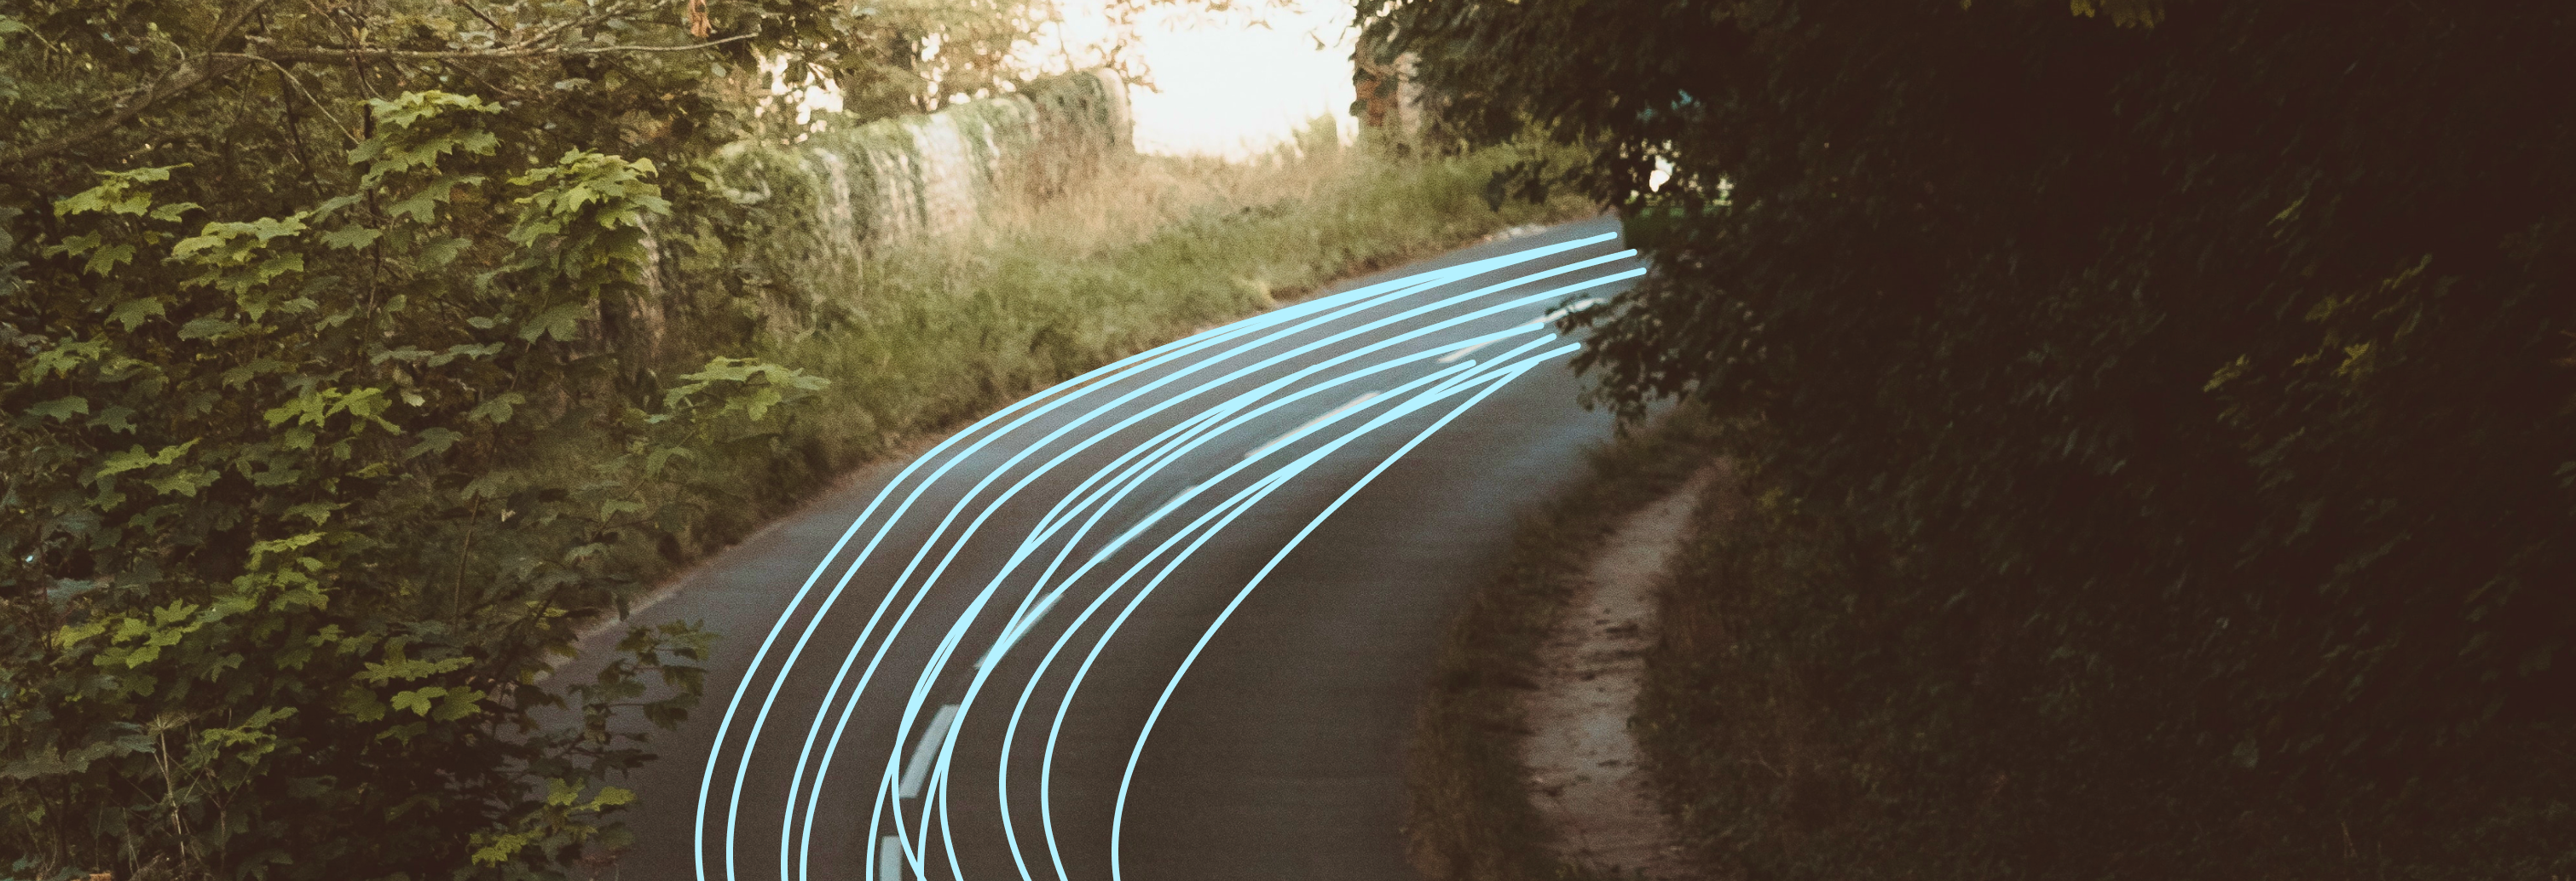 Image of a country road with scribble lines overlayed